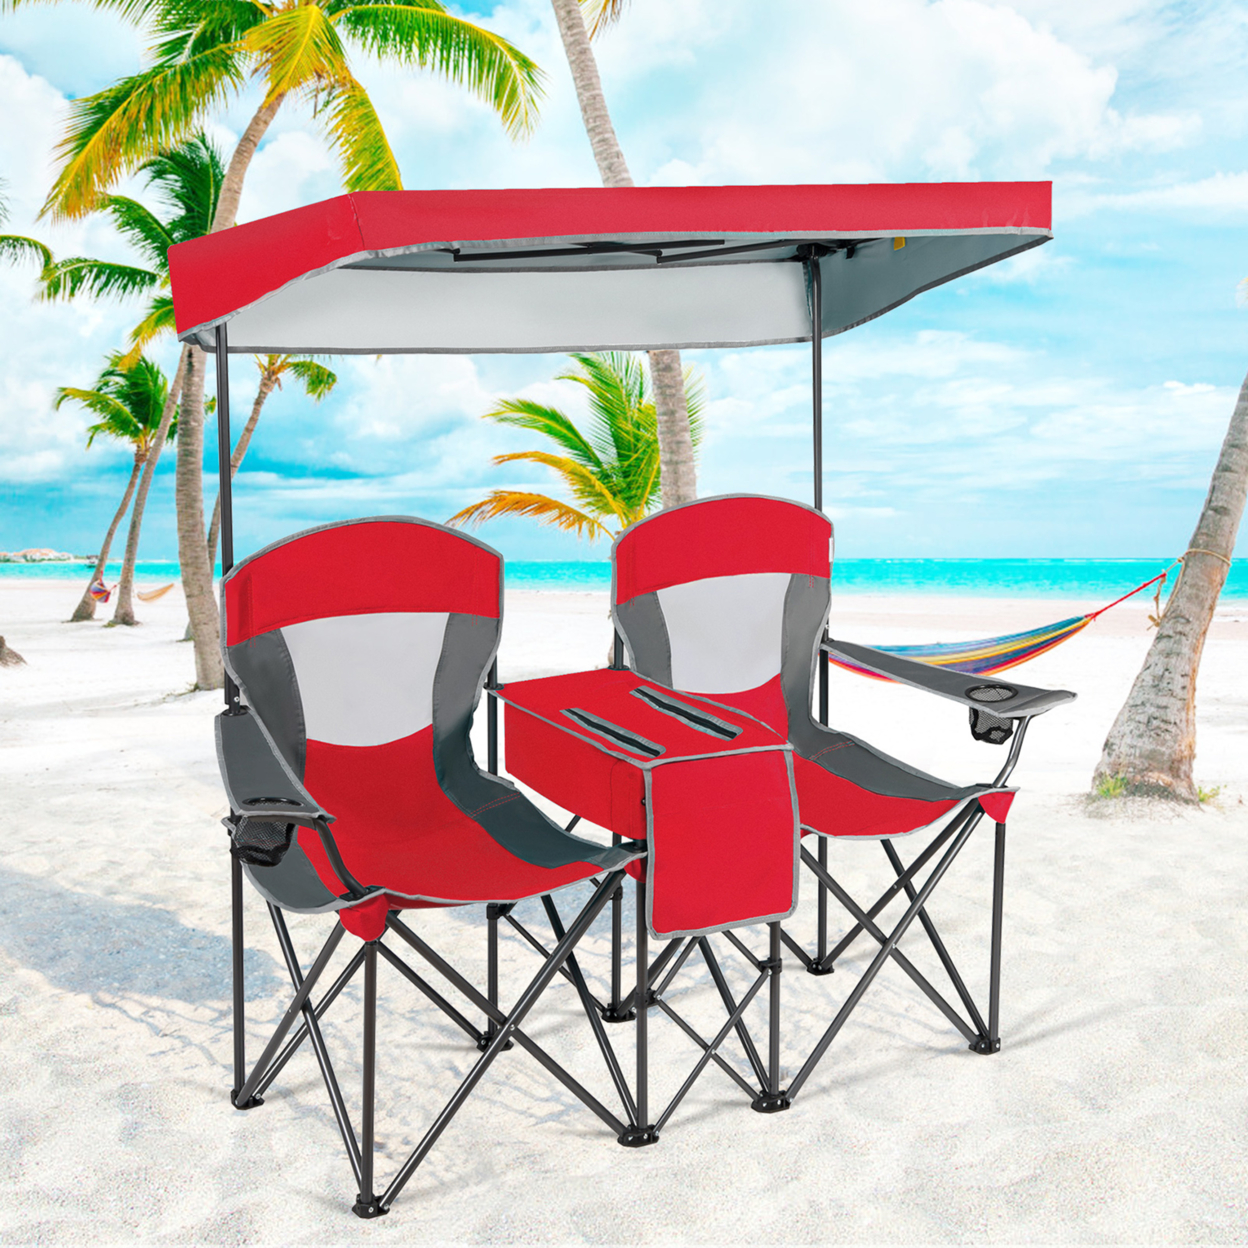 Folding 2-person Camping Chairs Double Sunshade Chairs W/ Canopy Blue/Turquoise/Red - Red